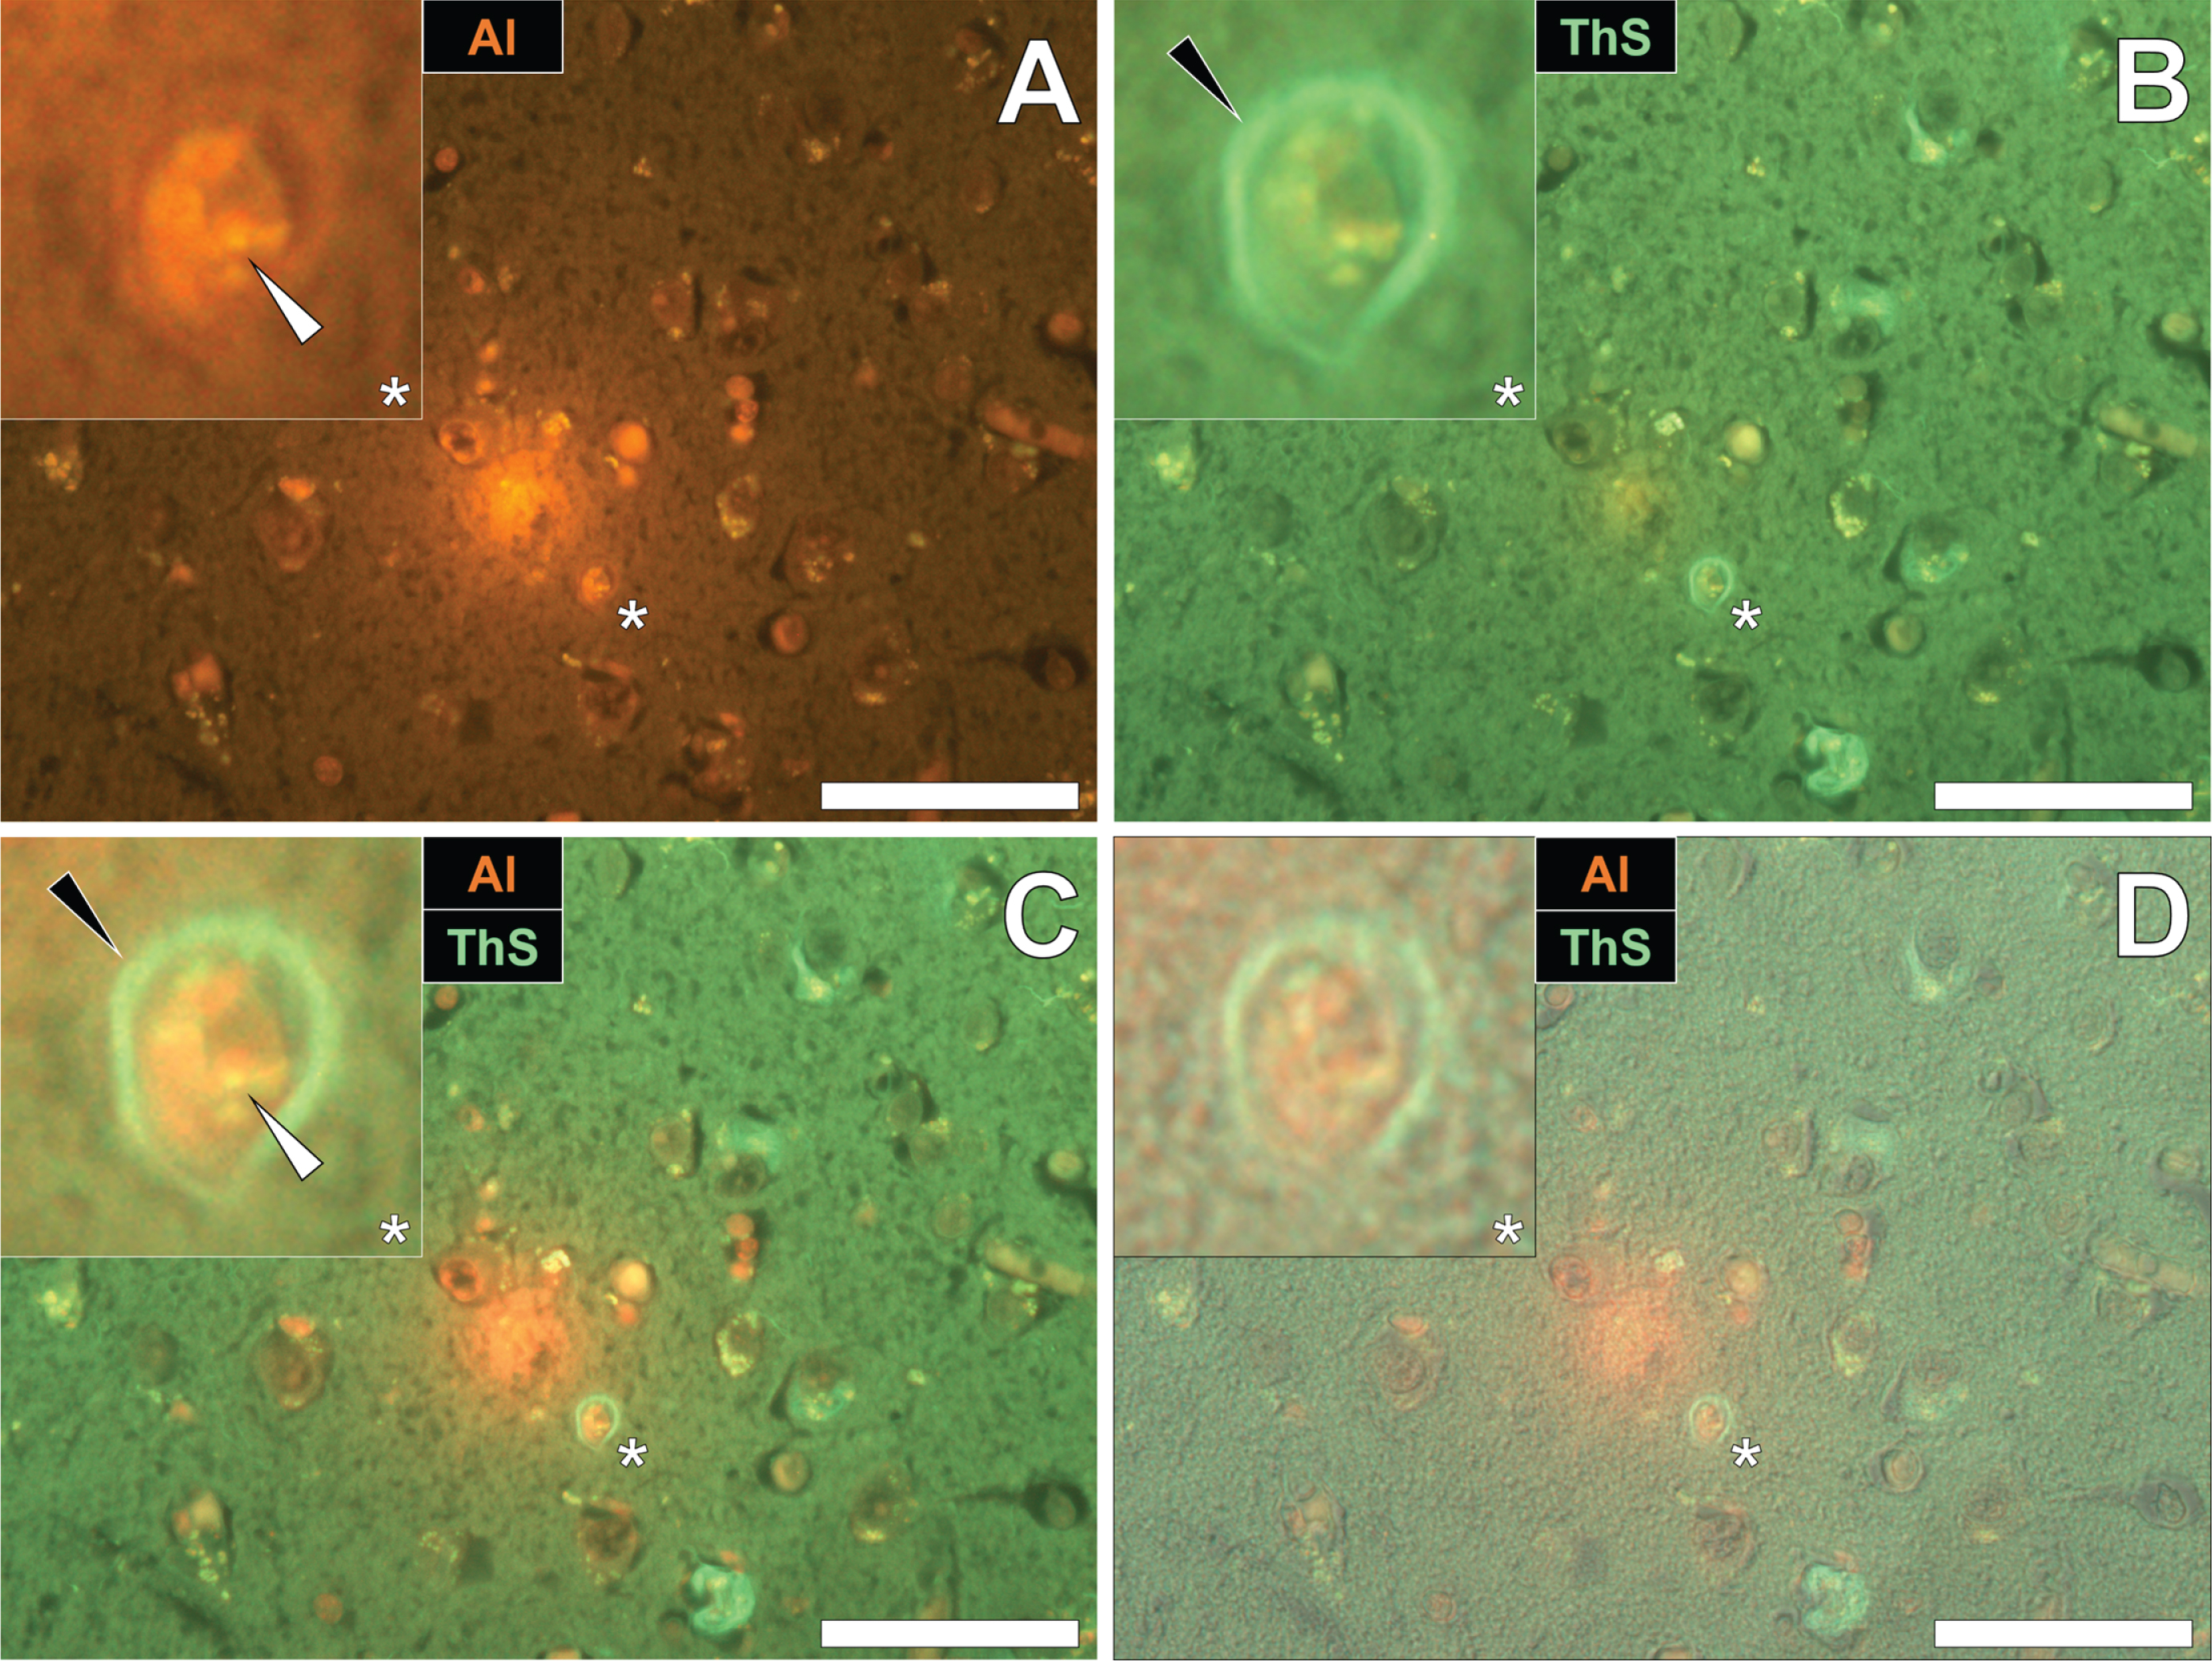 Intracellular aluminum co-located with ThS-reactive NFTs in the temporal cortex of a Colombian donor (Case 90: Female, aged 45) with fAD (PSEN1-E280A mutation). A) Punctate intracellular aluminum (orange, white arrows) in neuronal cells exhibiting positive (green) fluorescence for (B) intraneuronal NFTs (black arrows) with (C) merging of fluorescence channels and the brightfield overlay (D) depicting their co-deposition. Magnified inserts are denoted by asterisks in the respective fluorescence micrographs. Al, aluminum; ThS, thioflavin S. Magnification: X 400, scale bars: 50μm.